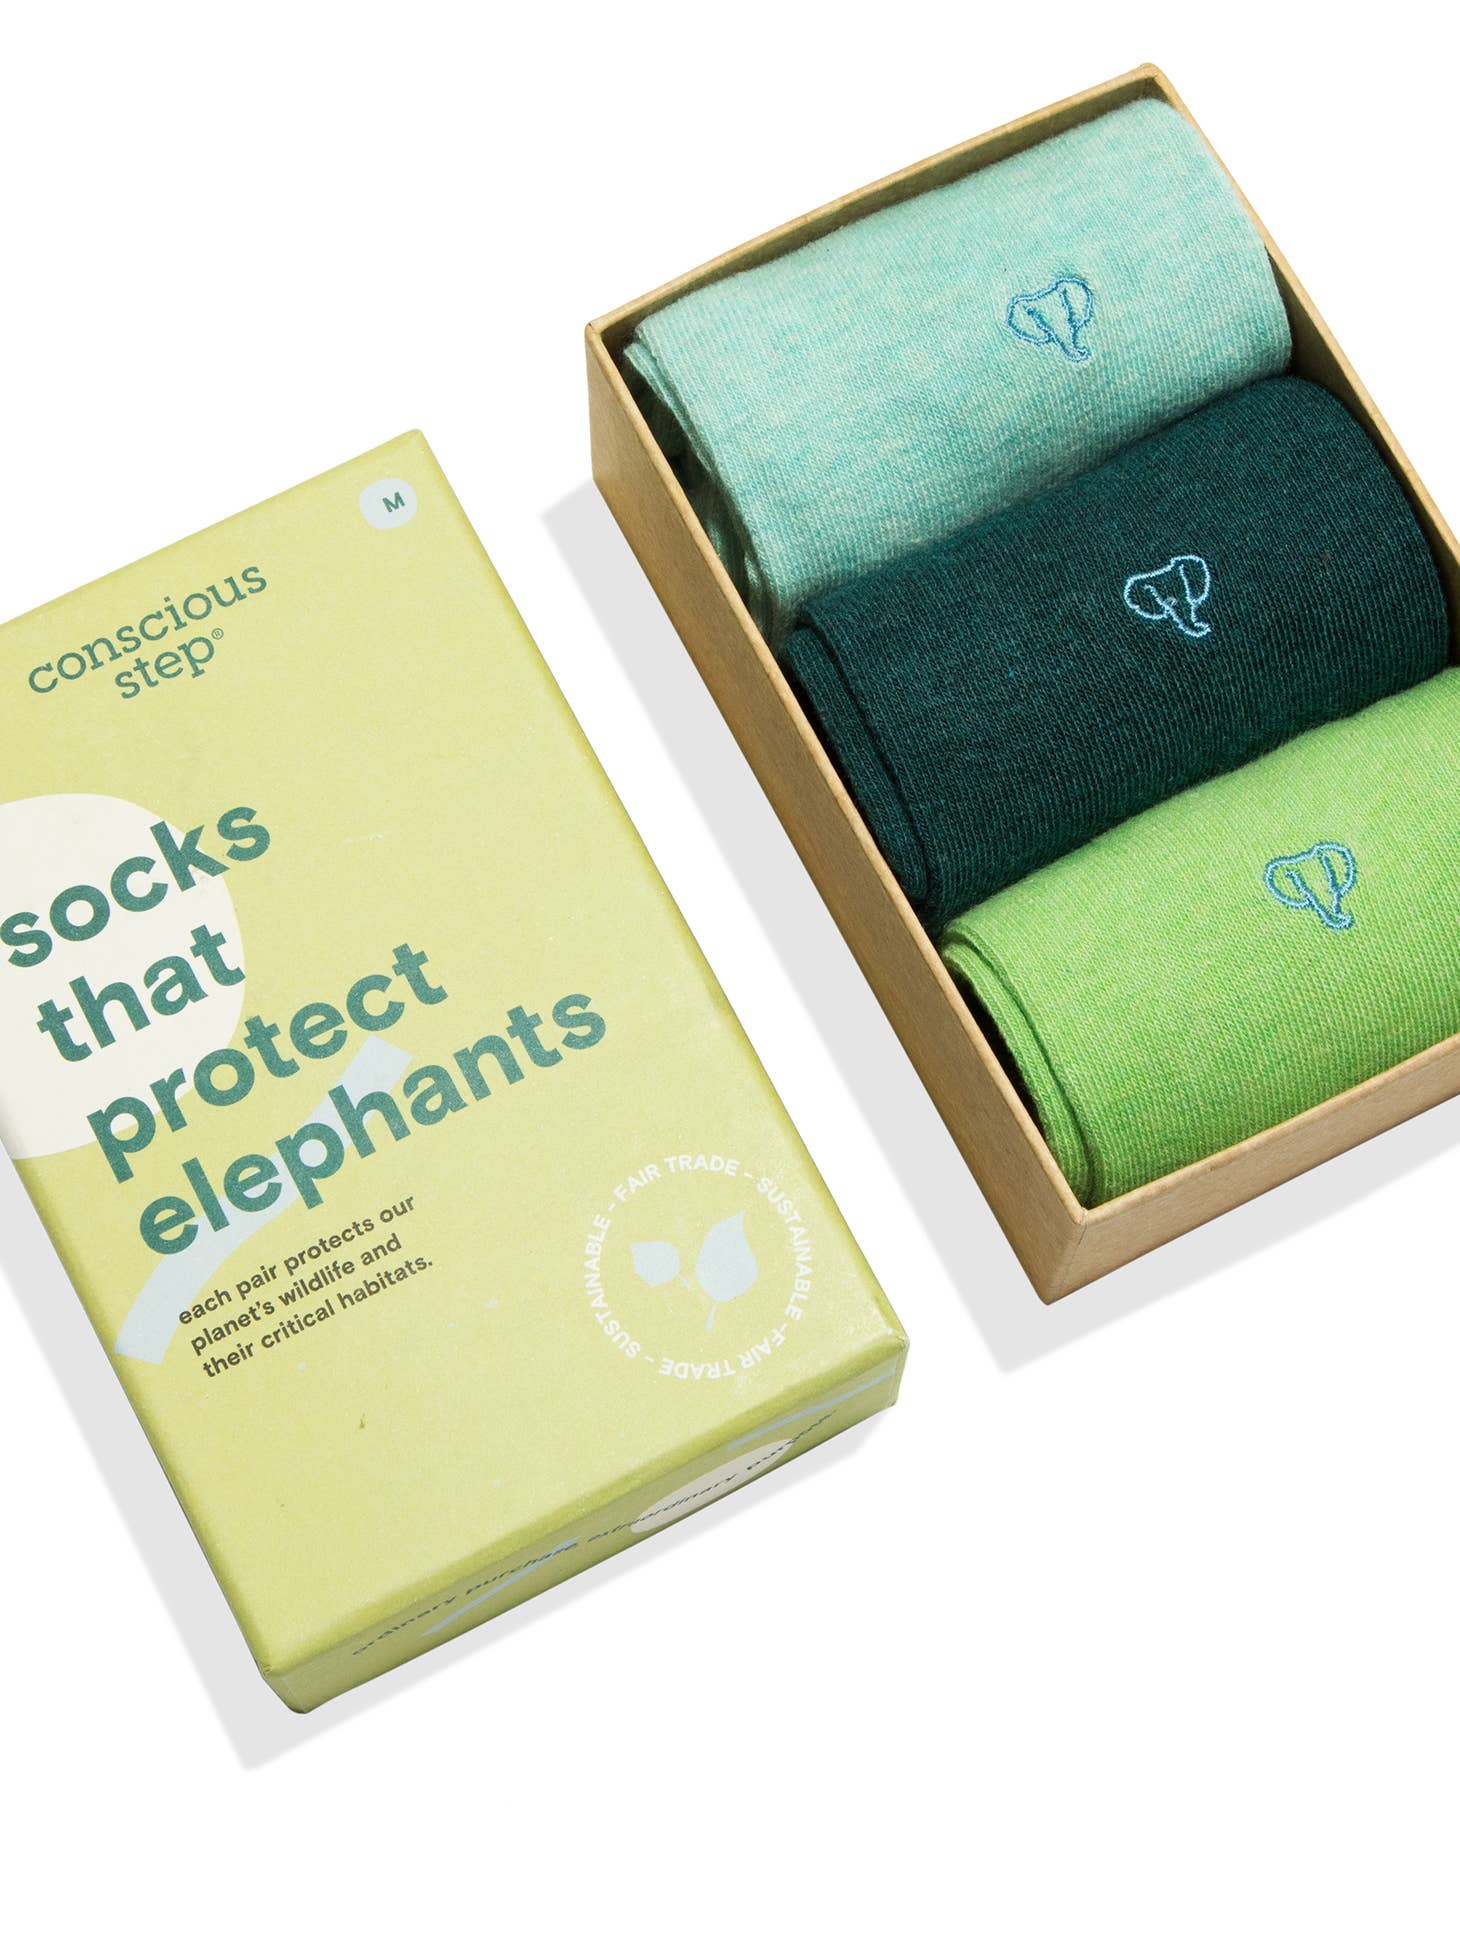 Elephant Box Set made from sustainable materials